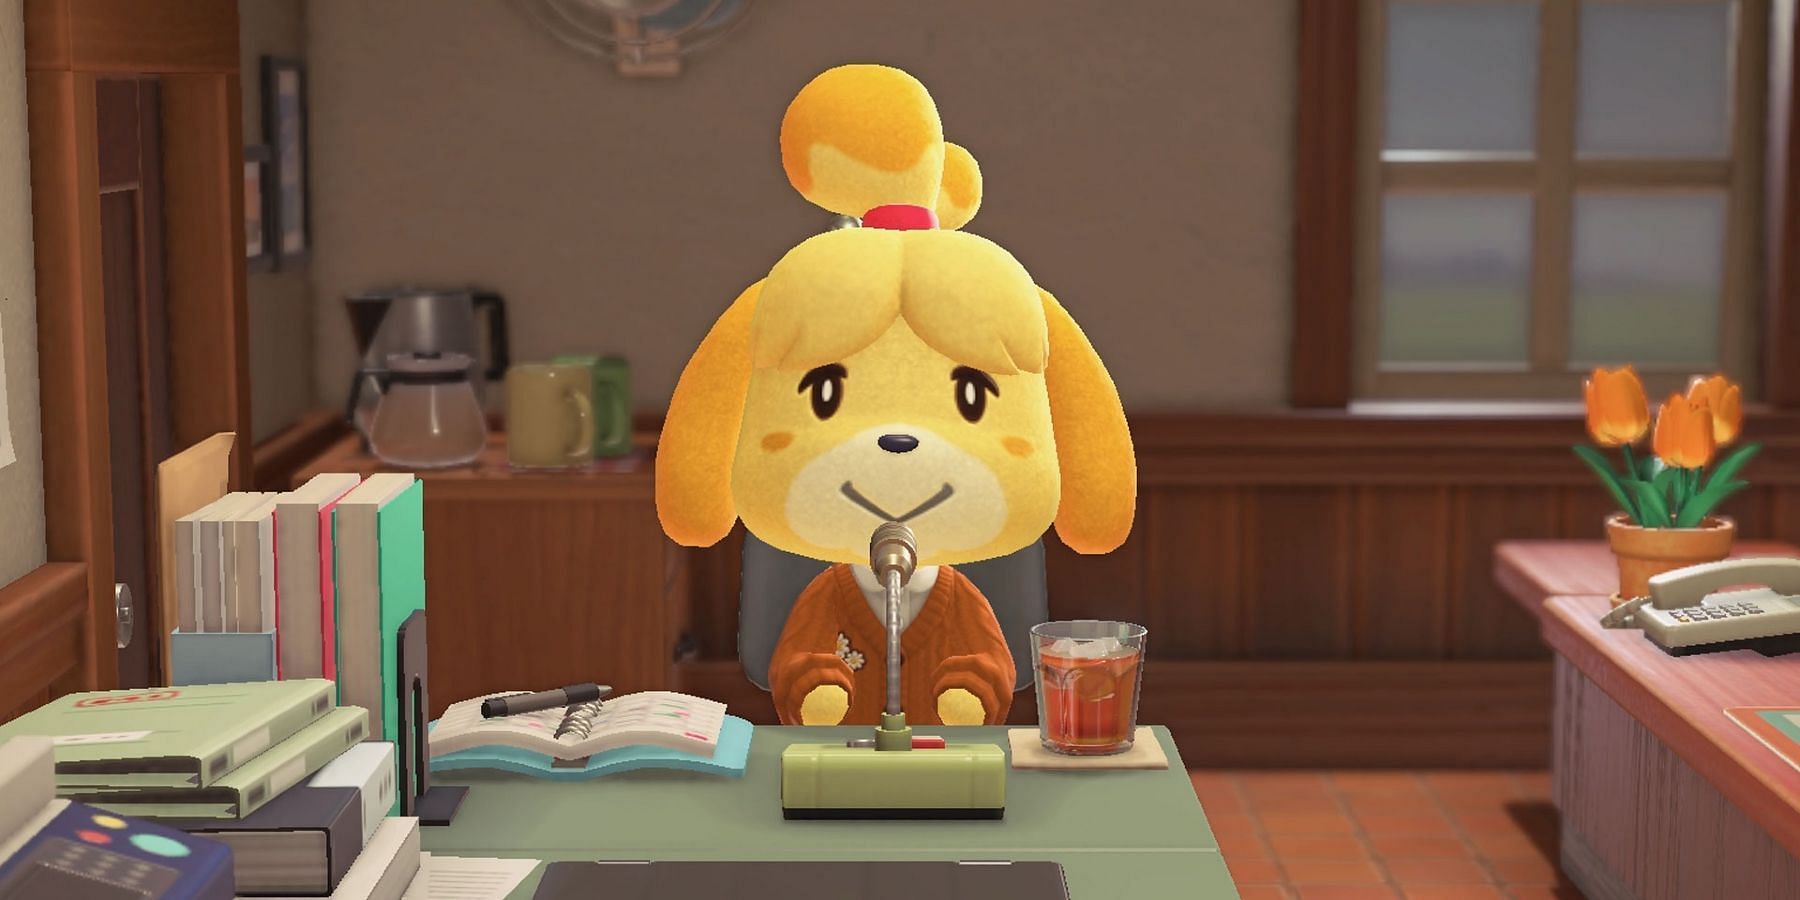 Isabelle will enact the ordinances if players pay her for them. (Image via Nintendo)